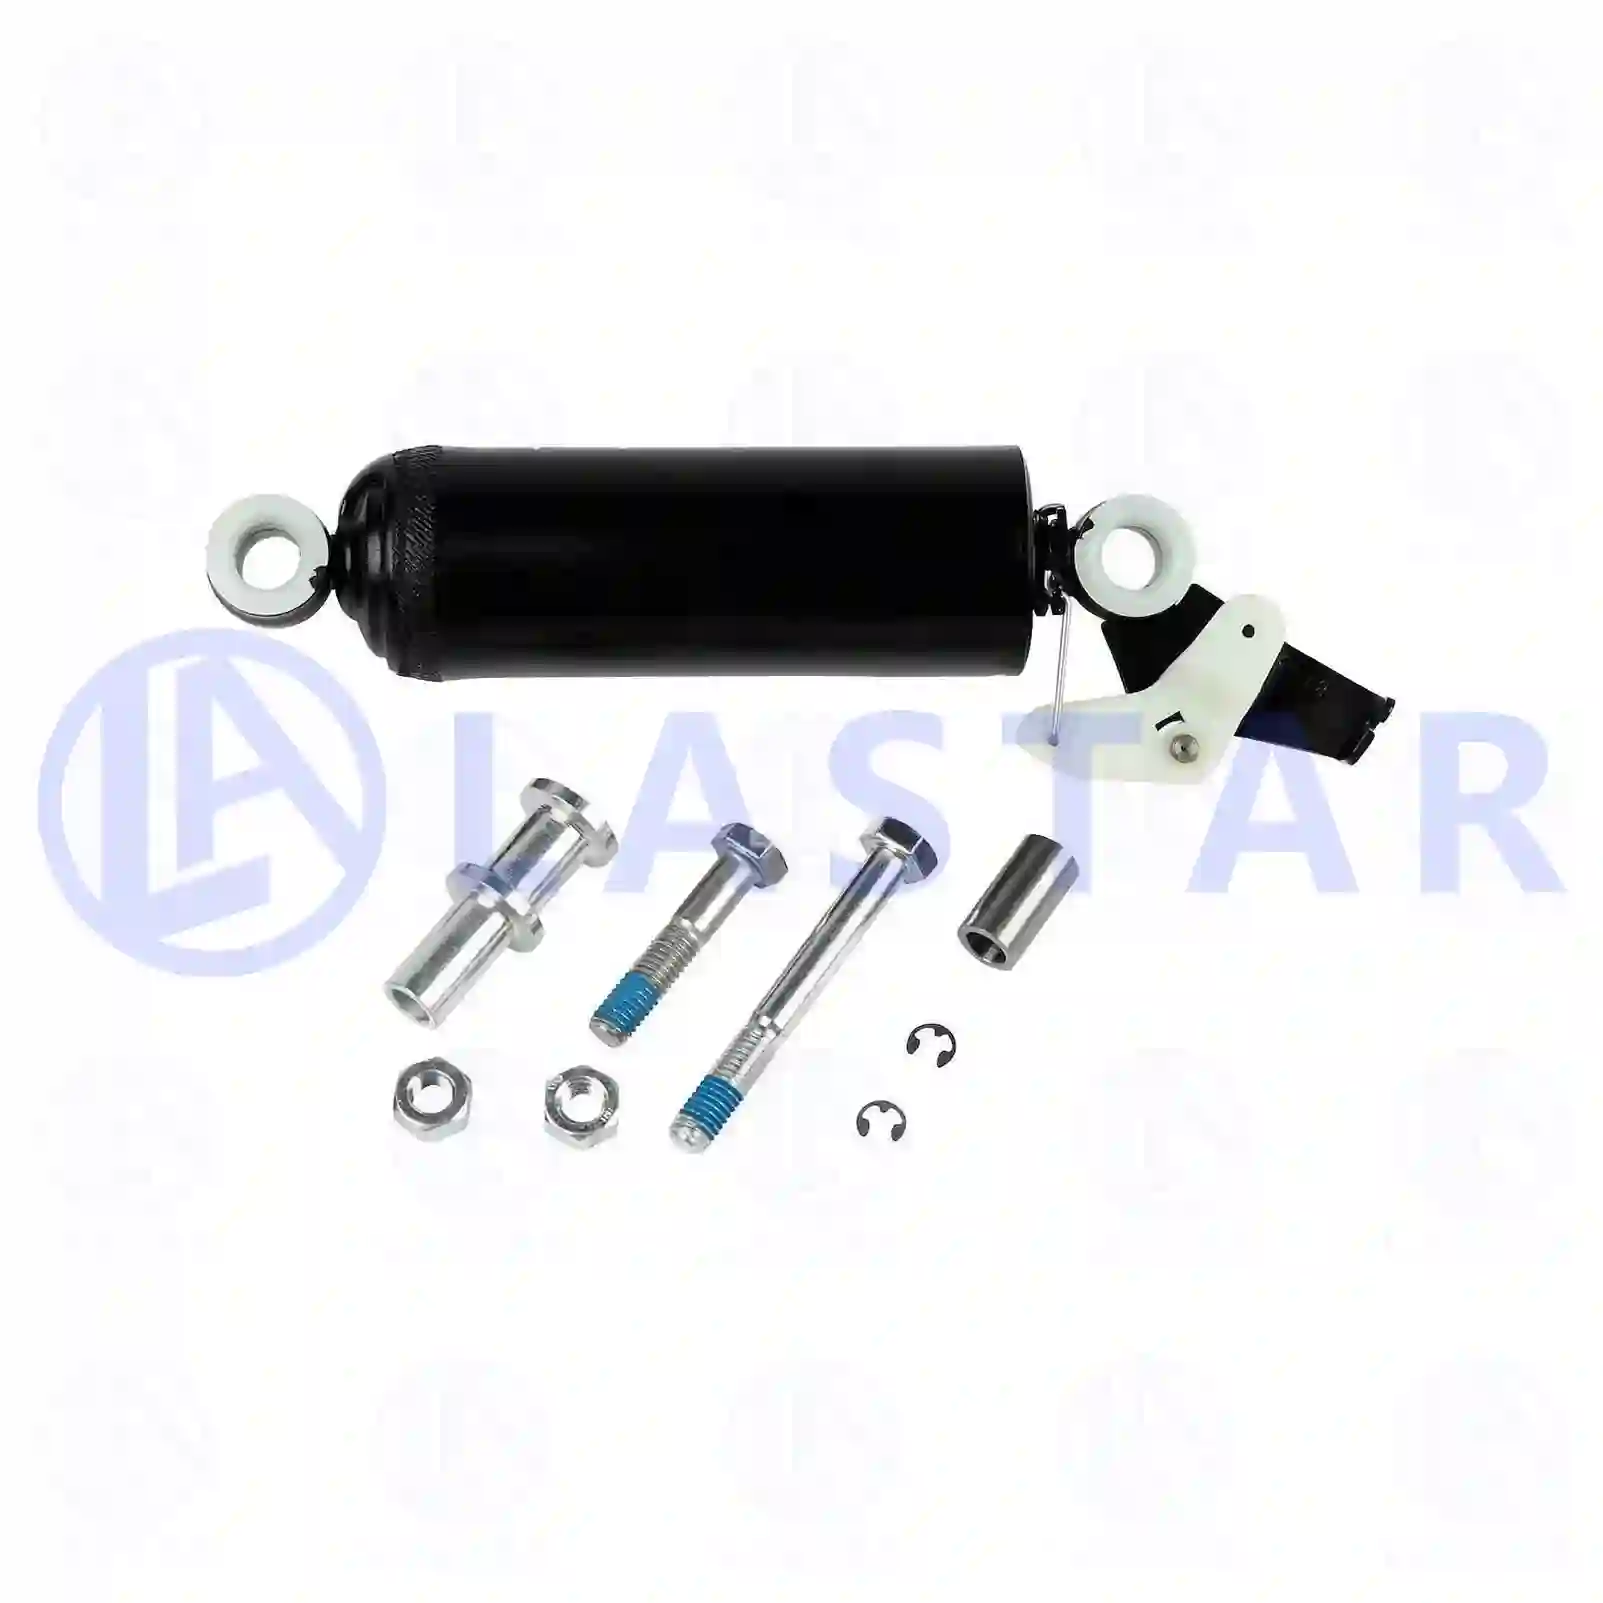 Shock absorber, seat, without accessories, 77734884, 0019191245, 5001857903, 1498862, 2438272, 20443547, ZG41656-0008 ||  77734884 Lastar Spare Part | Truck Spare Parts, Auotomotive Spare Parts Shock absorber, seat, without accessories, 77734884, 0019191245, 5001857903, 1498862, 2438272, 20443547, ZG41656-0008 ||  77734884 Lastar Spare Part | Truck Spare Parts, Auotomotive Spare Parts